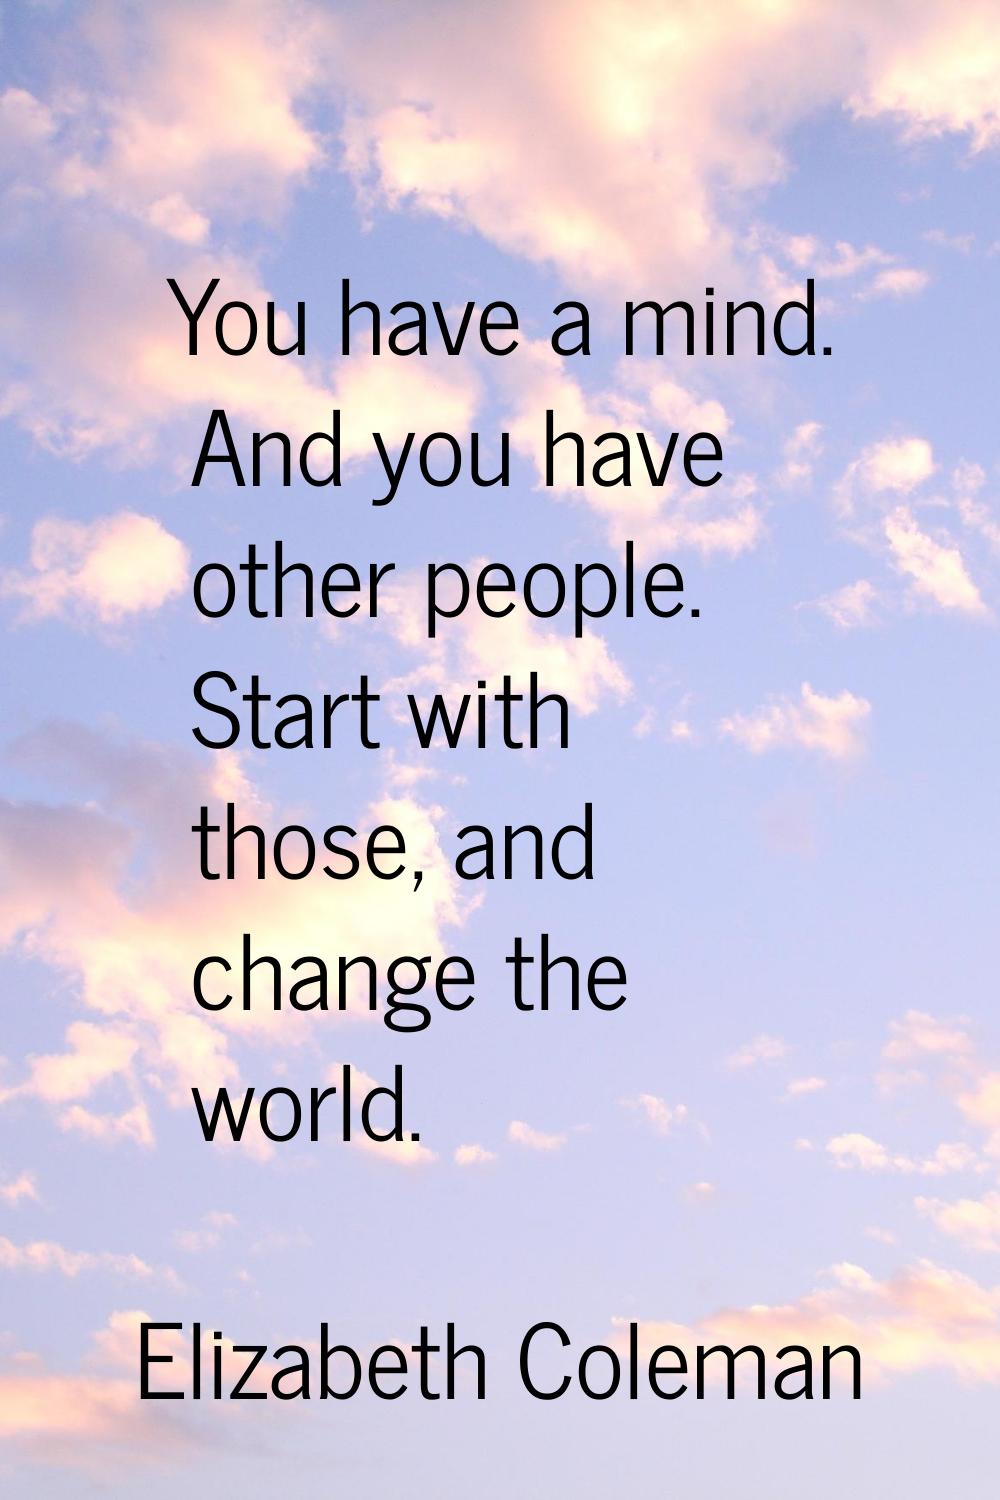 You have a mind. And you have other people. Start with those, and change the world.